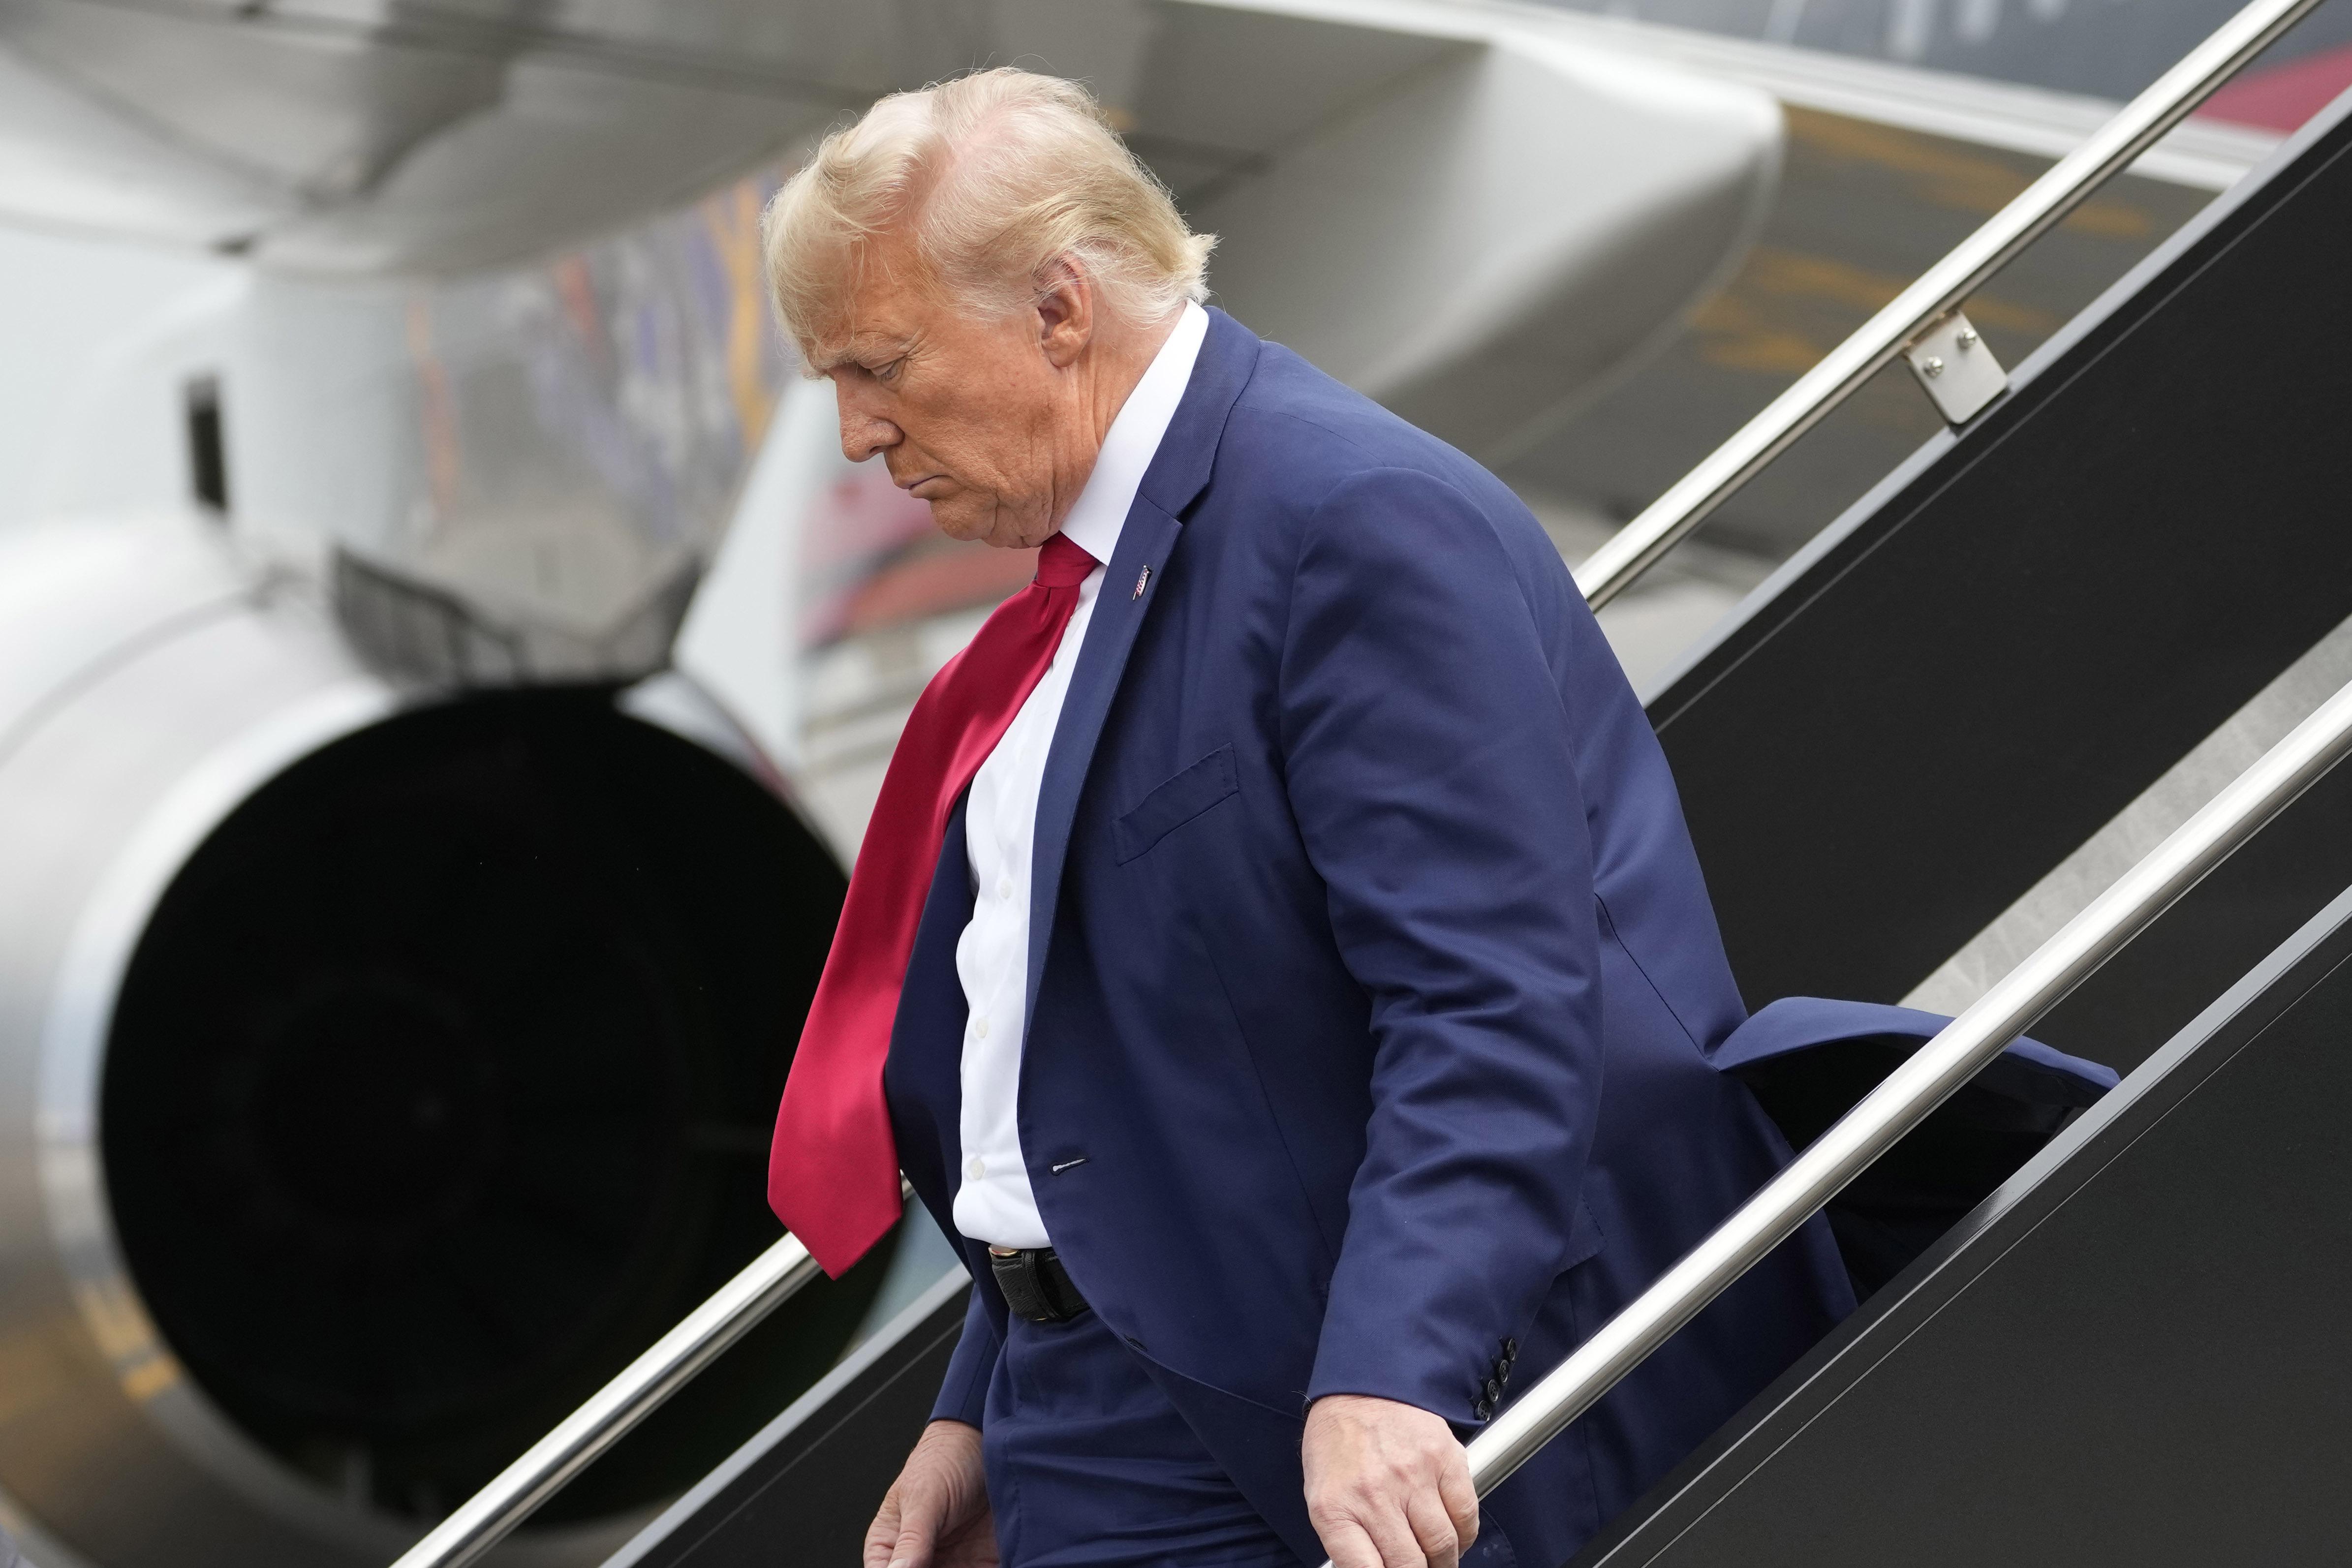 Former President Donald Trump arrives at Ronald Reagan Washington National Airport, Thursday, Aug. 3, 2023, in Arlington, Va., as he heads to Washington to face a judge on federal conspiracy charges alleging Trump conspired to subvert the 2020 election. (AP Photo / Alex Brandon)